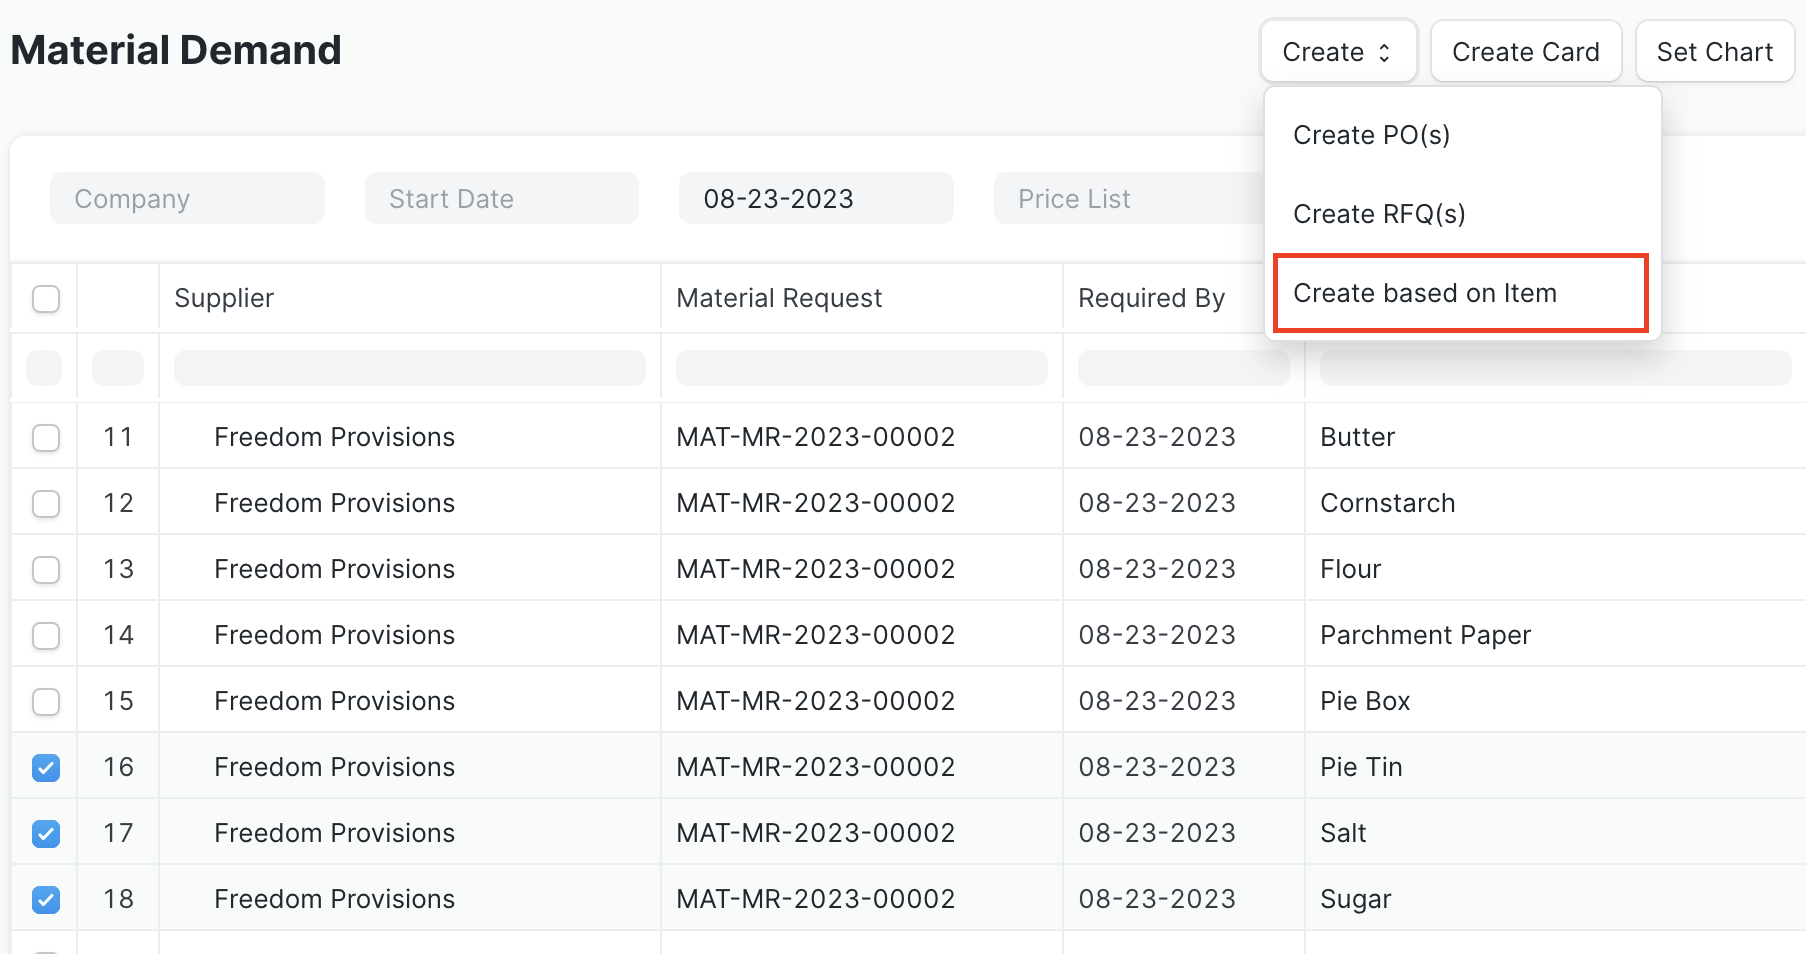 Screen shot of the Material Demand report with Pie Tin, Salt, and Sugar Items selected for the Freedom Provisions Supplier and the Create based on Item option highlighted in the Create button dropdown